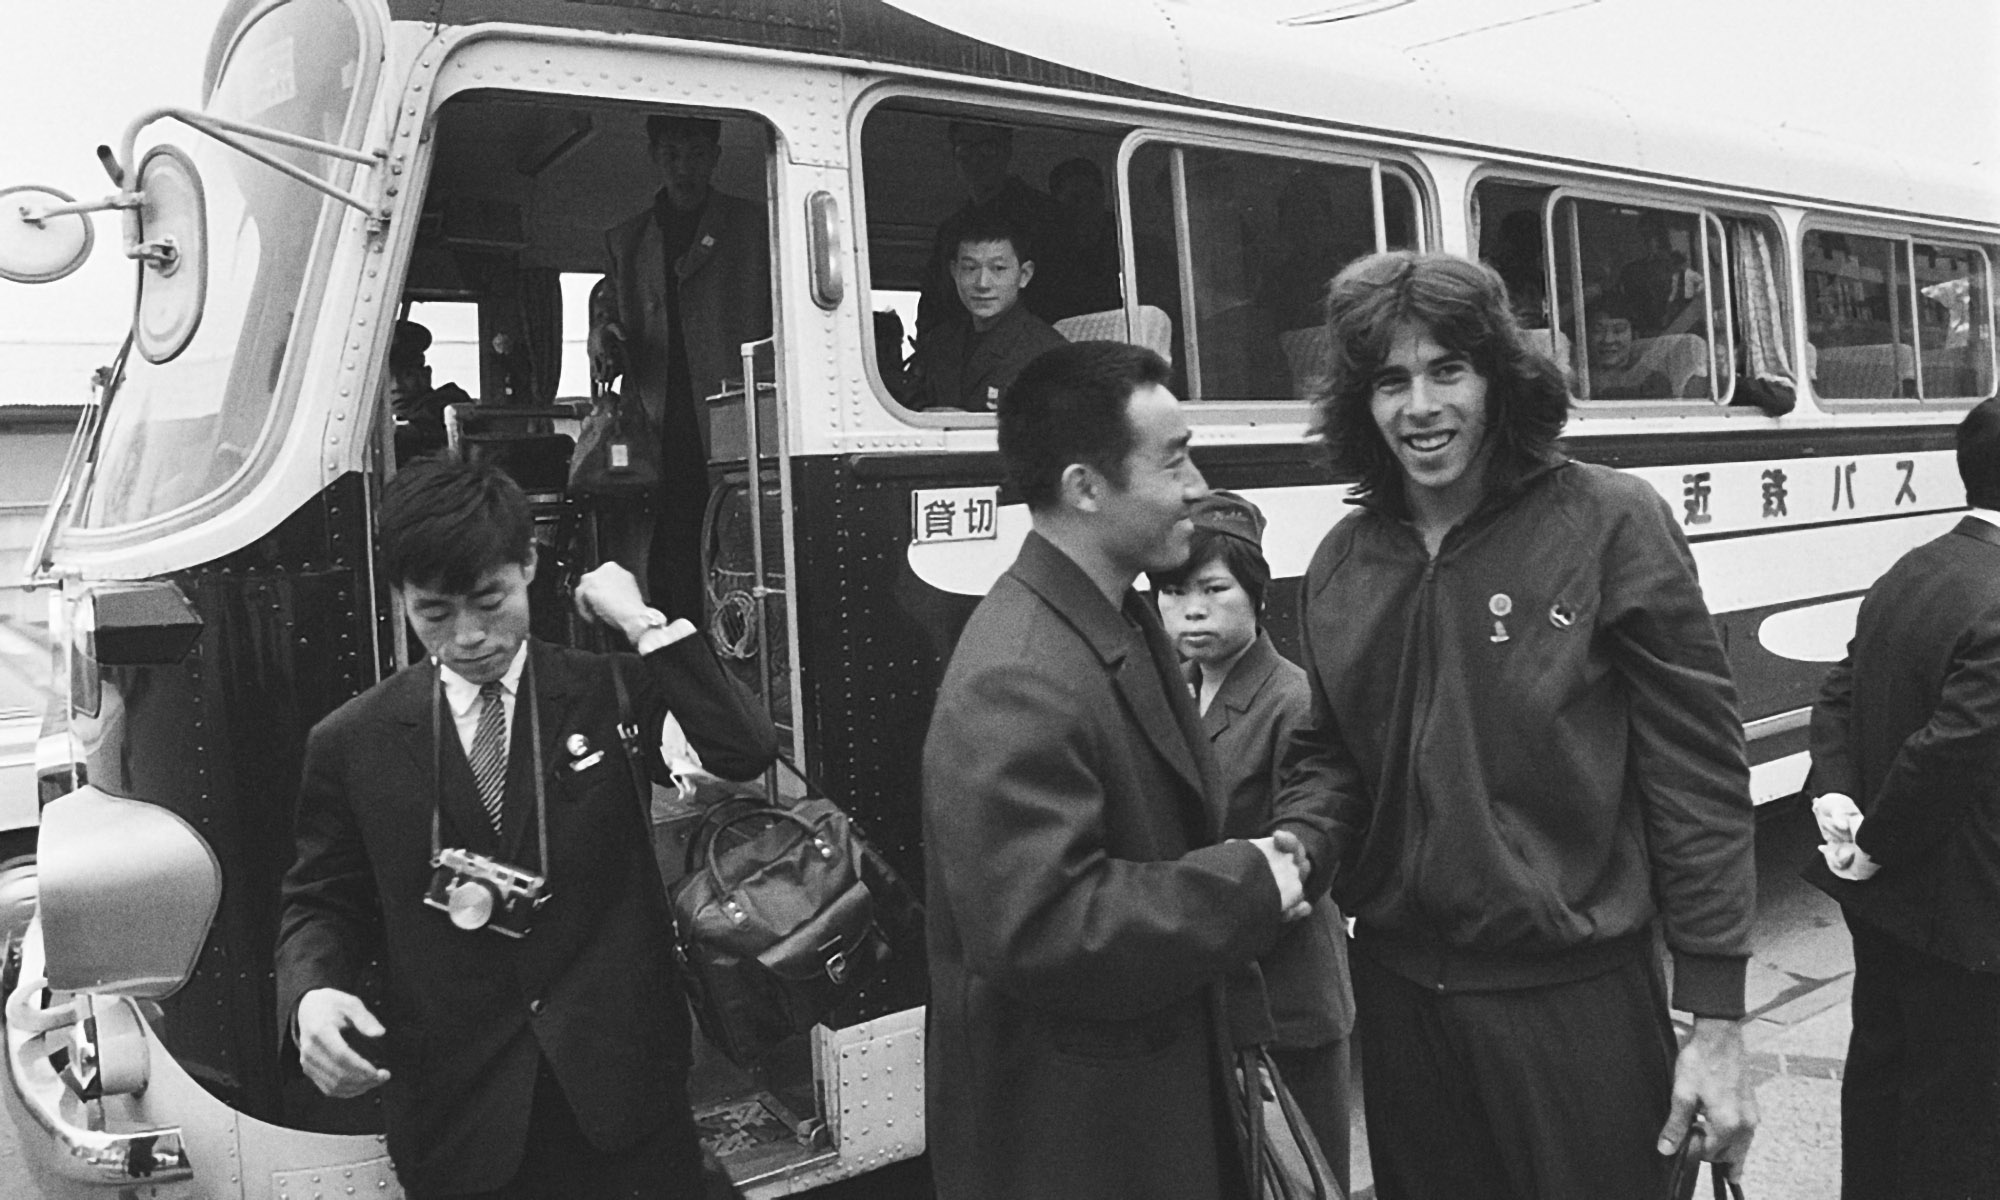 Glenn Cowan and zhuang zedong talking after getting off a bus in Japan